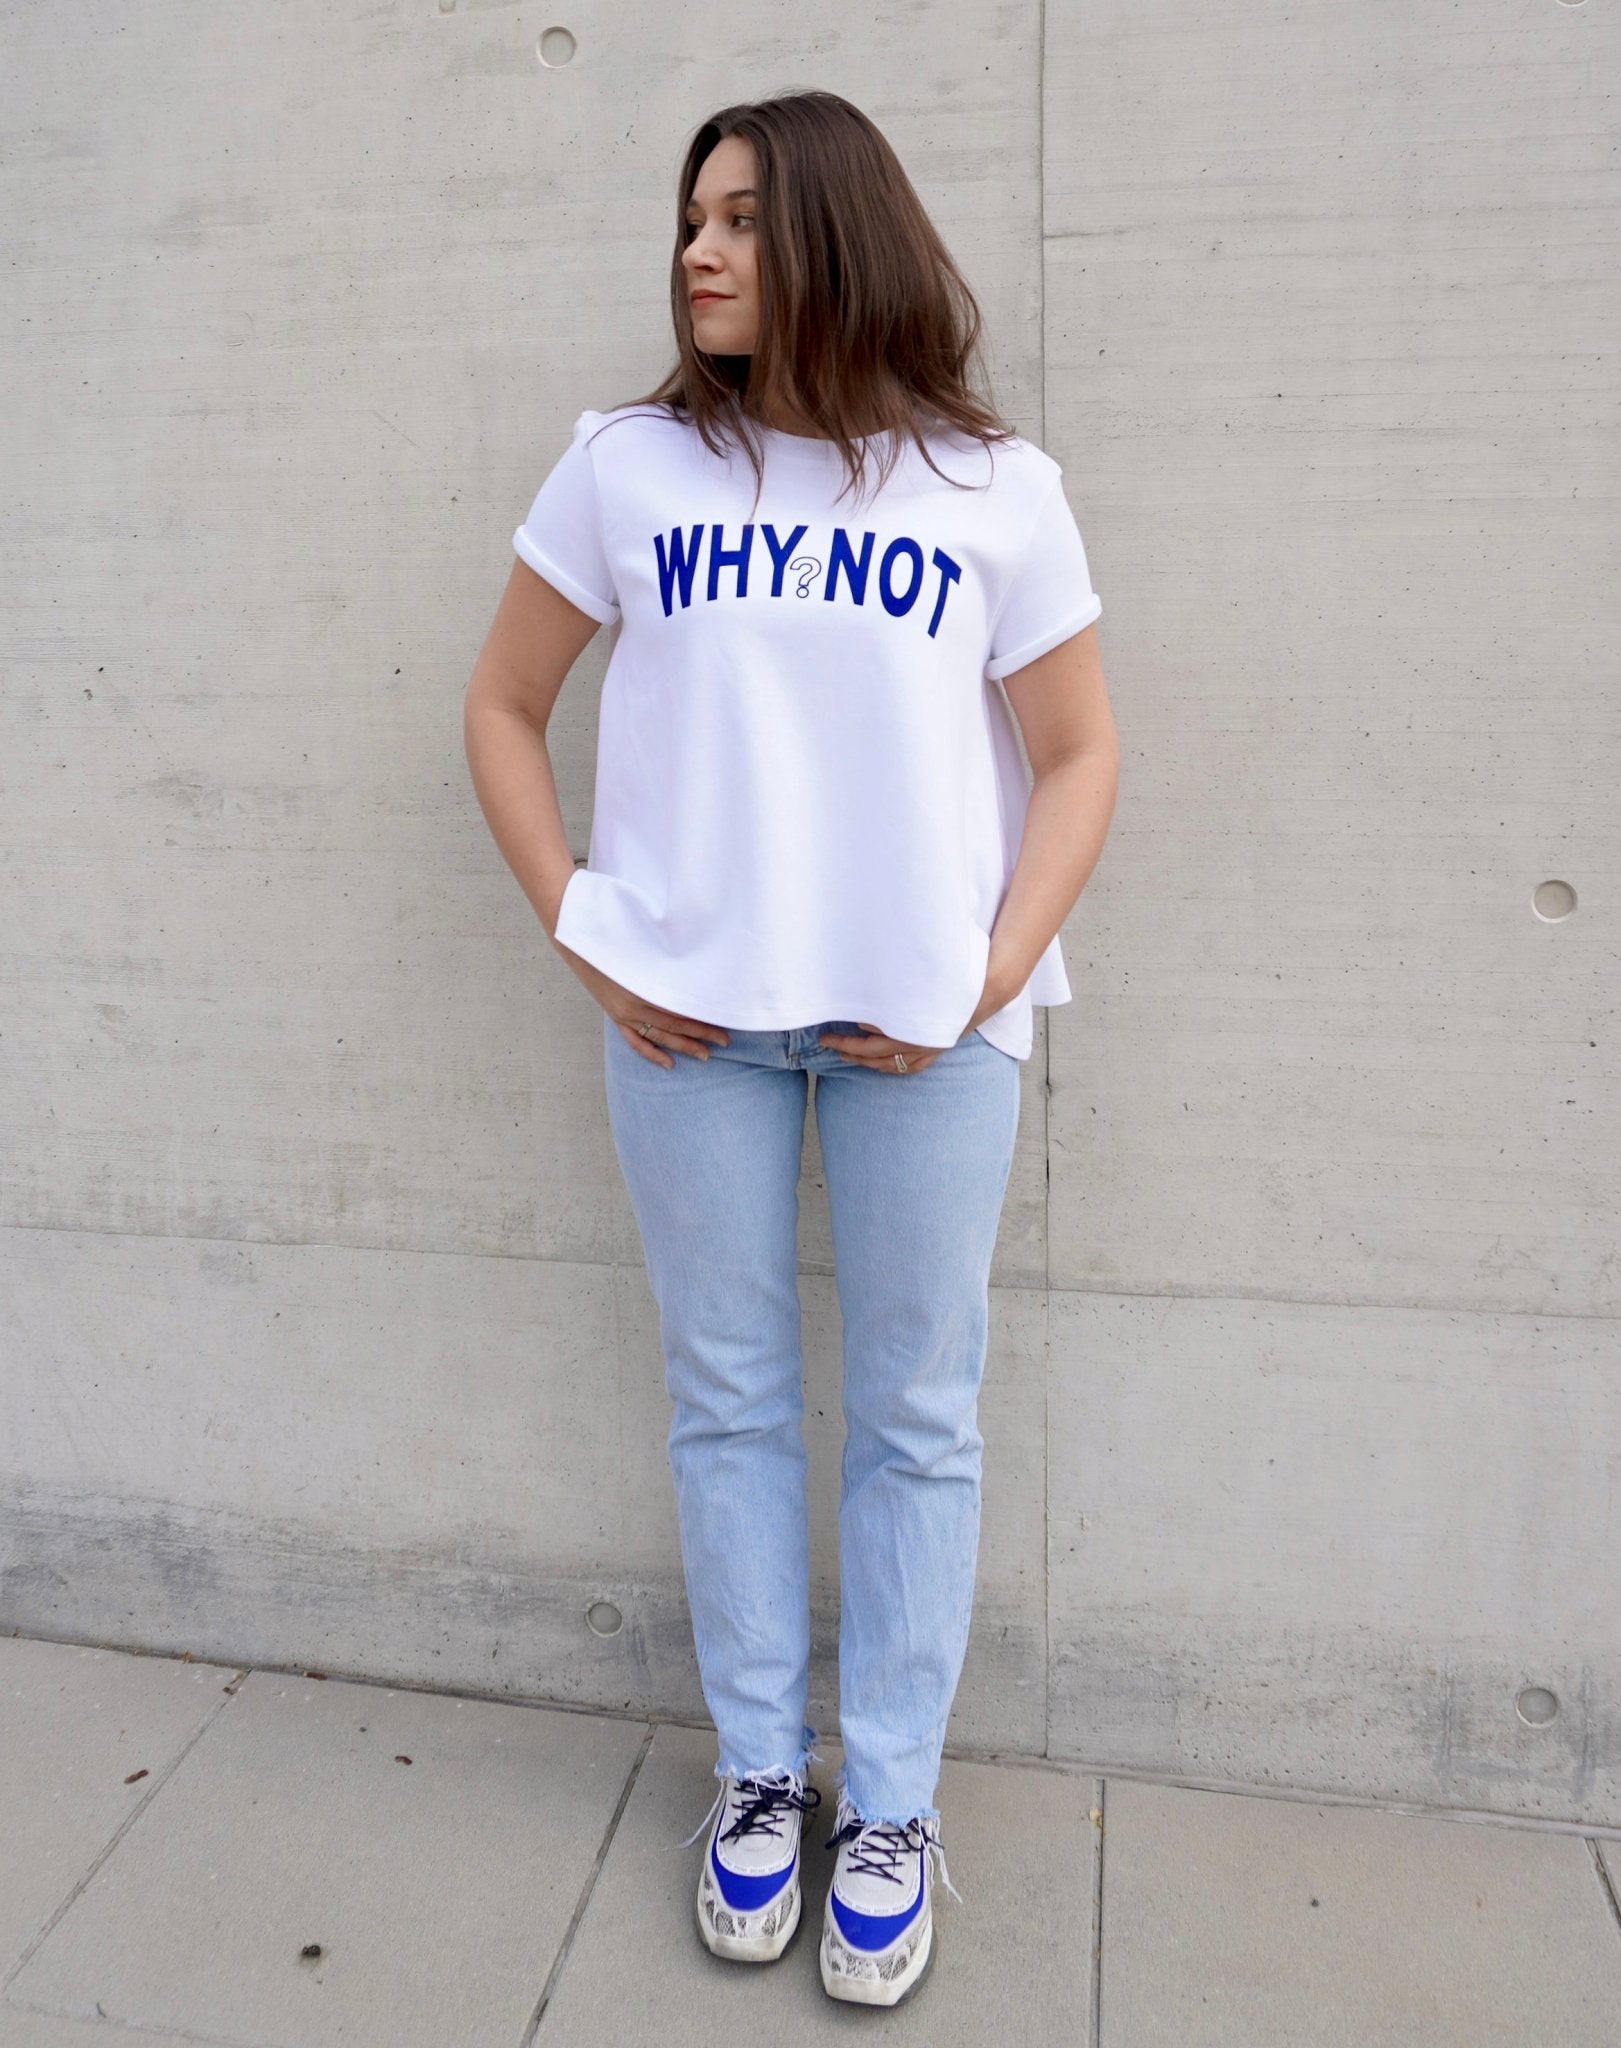 'WHY NOT?' Flowy T-Shirt - OBLIVIOUS?